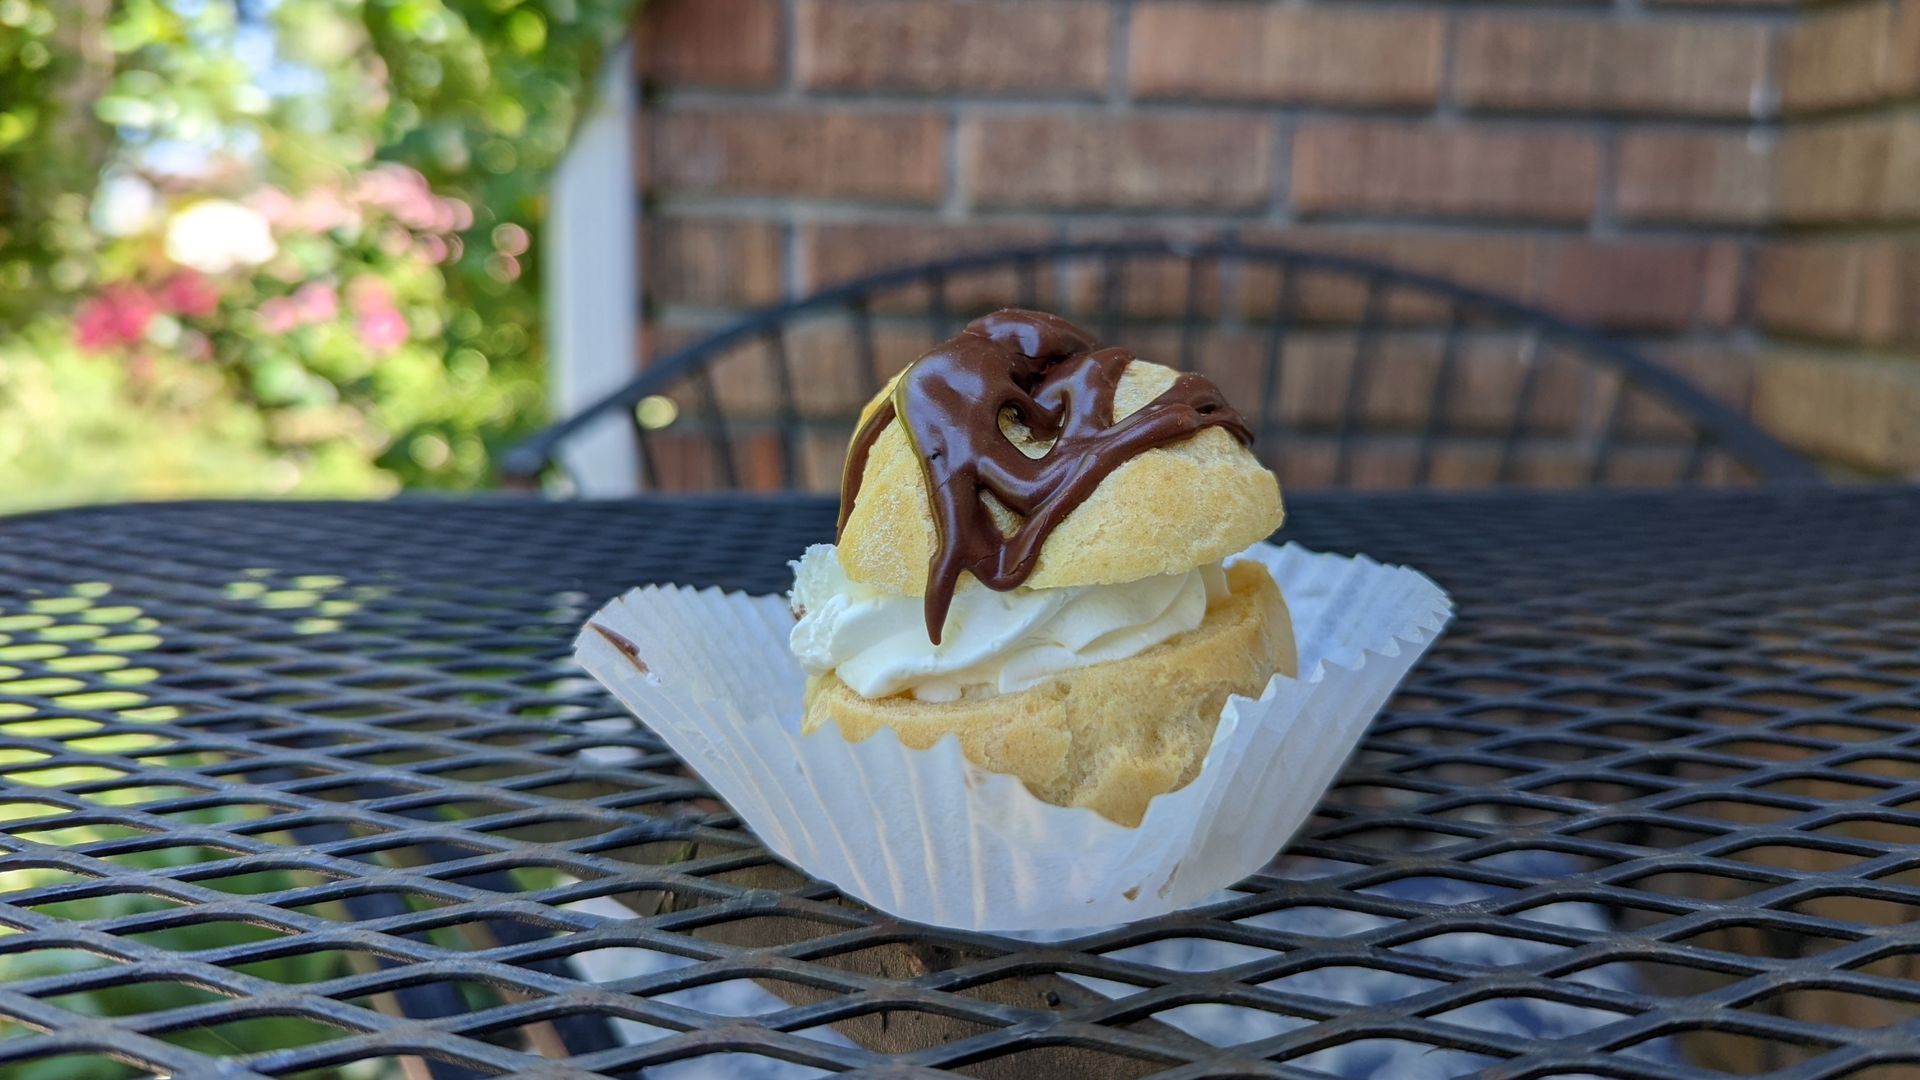 A cream puff is drizzled with chocolate and sitting on a metal table.